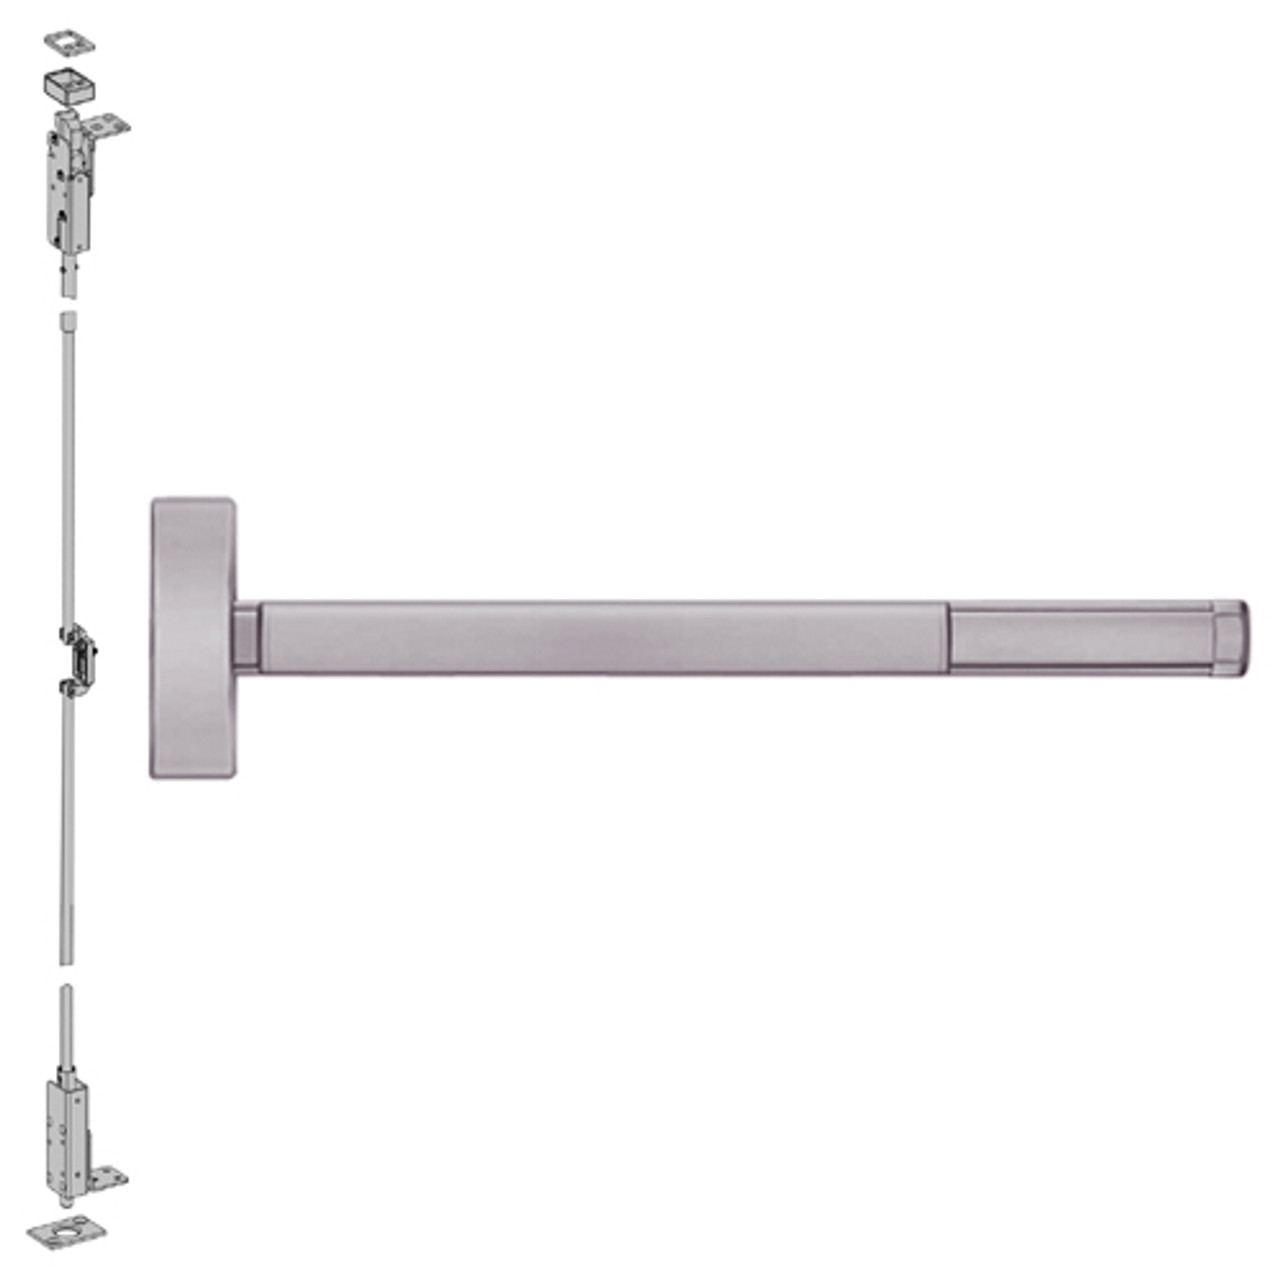 2715CD-630-36 PHI 2700 Series Wood Door Concealed Vertical Rod Device Prepped for Thumbpiece Always Active with Cylinder Dogging in Satin Stainless Steel Finish